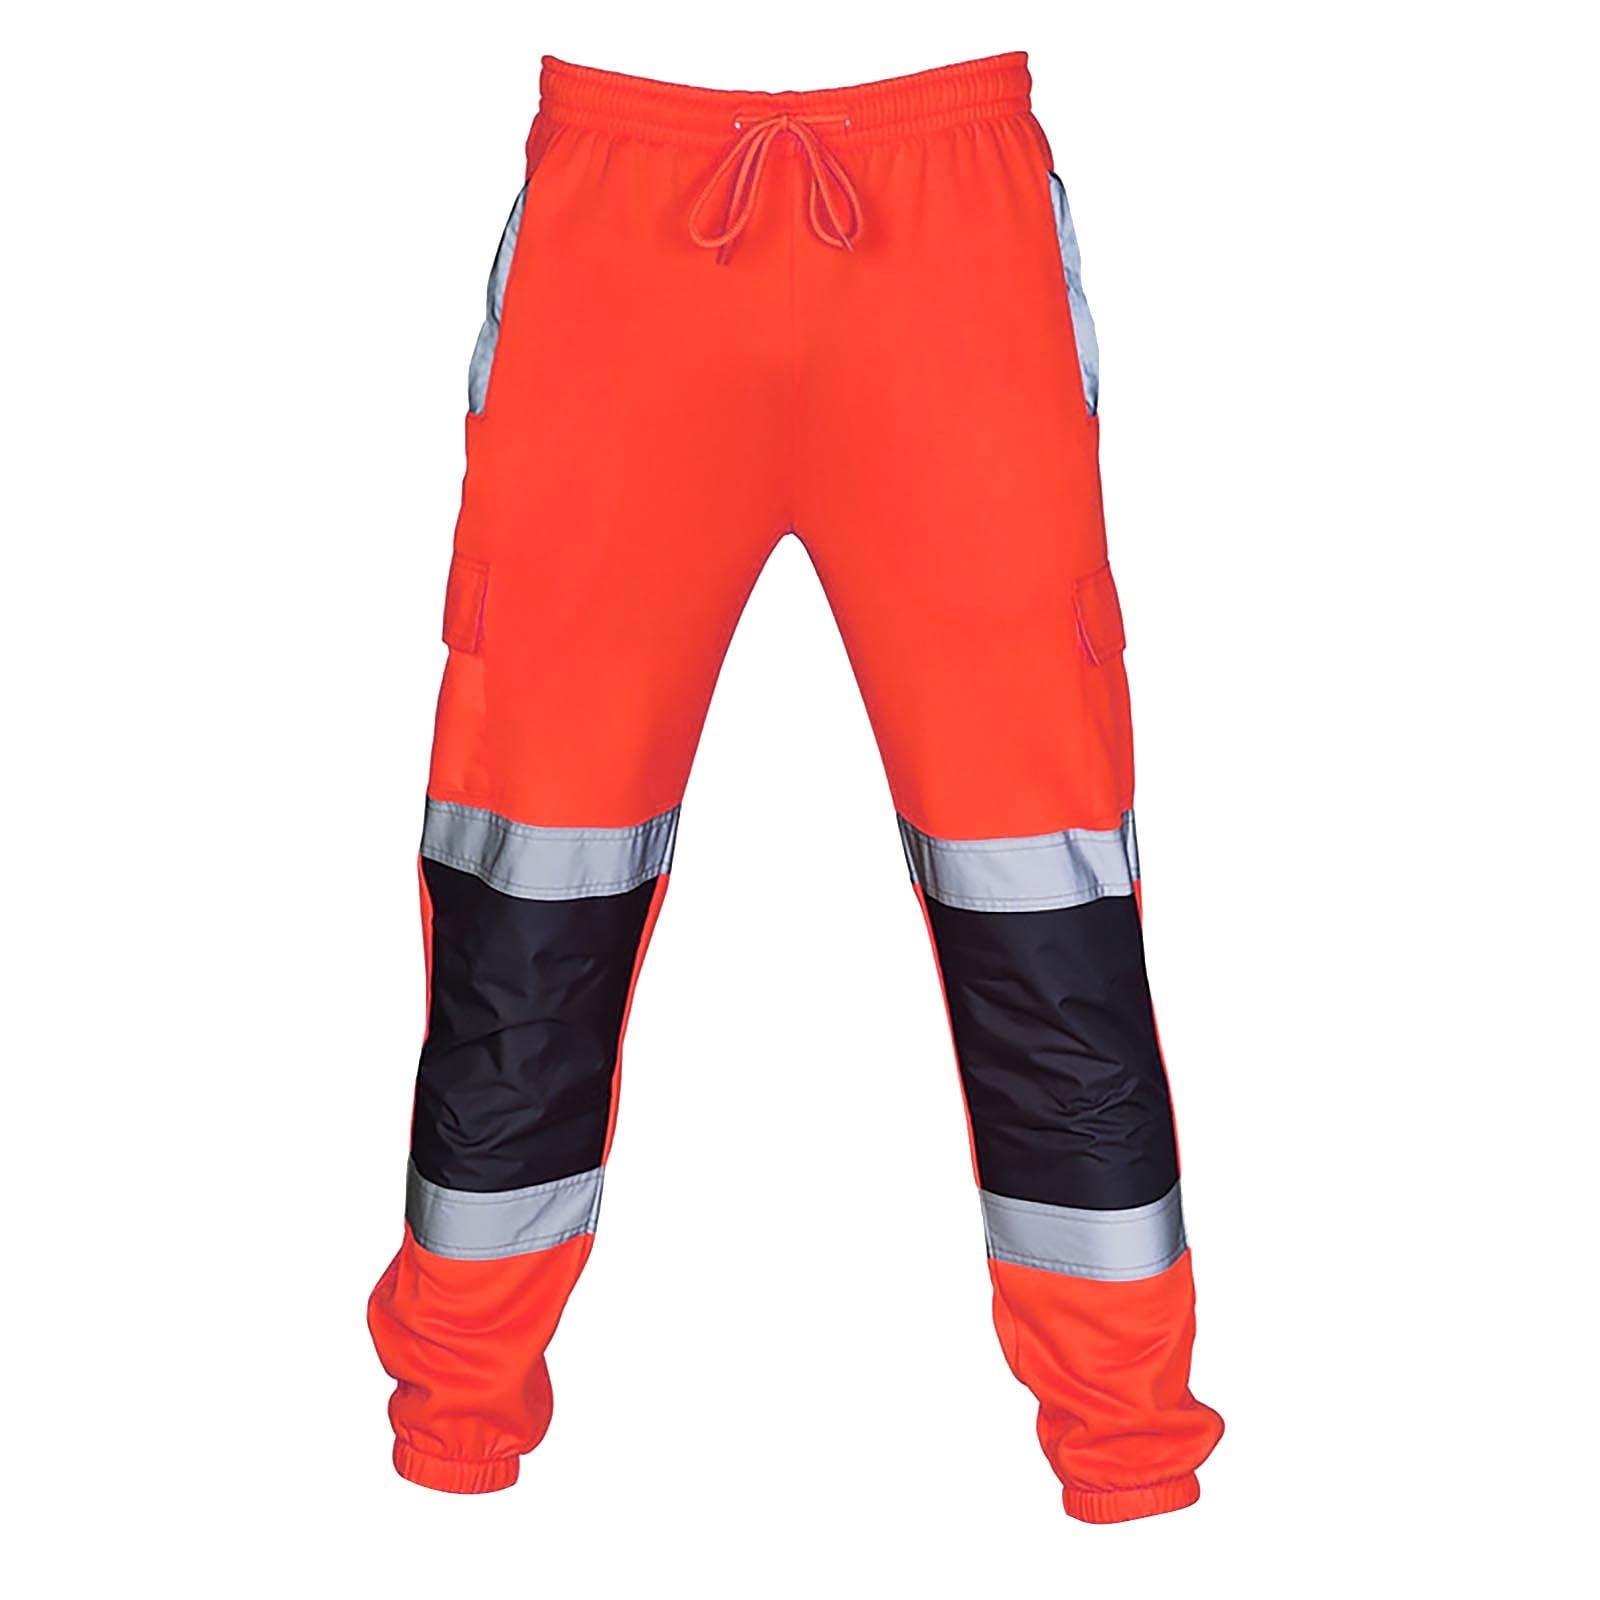 HaHaHappy Reflective Safety Pants for Men High Visibility Waterproof ...